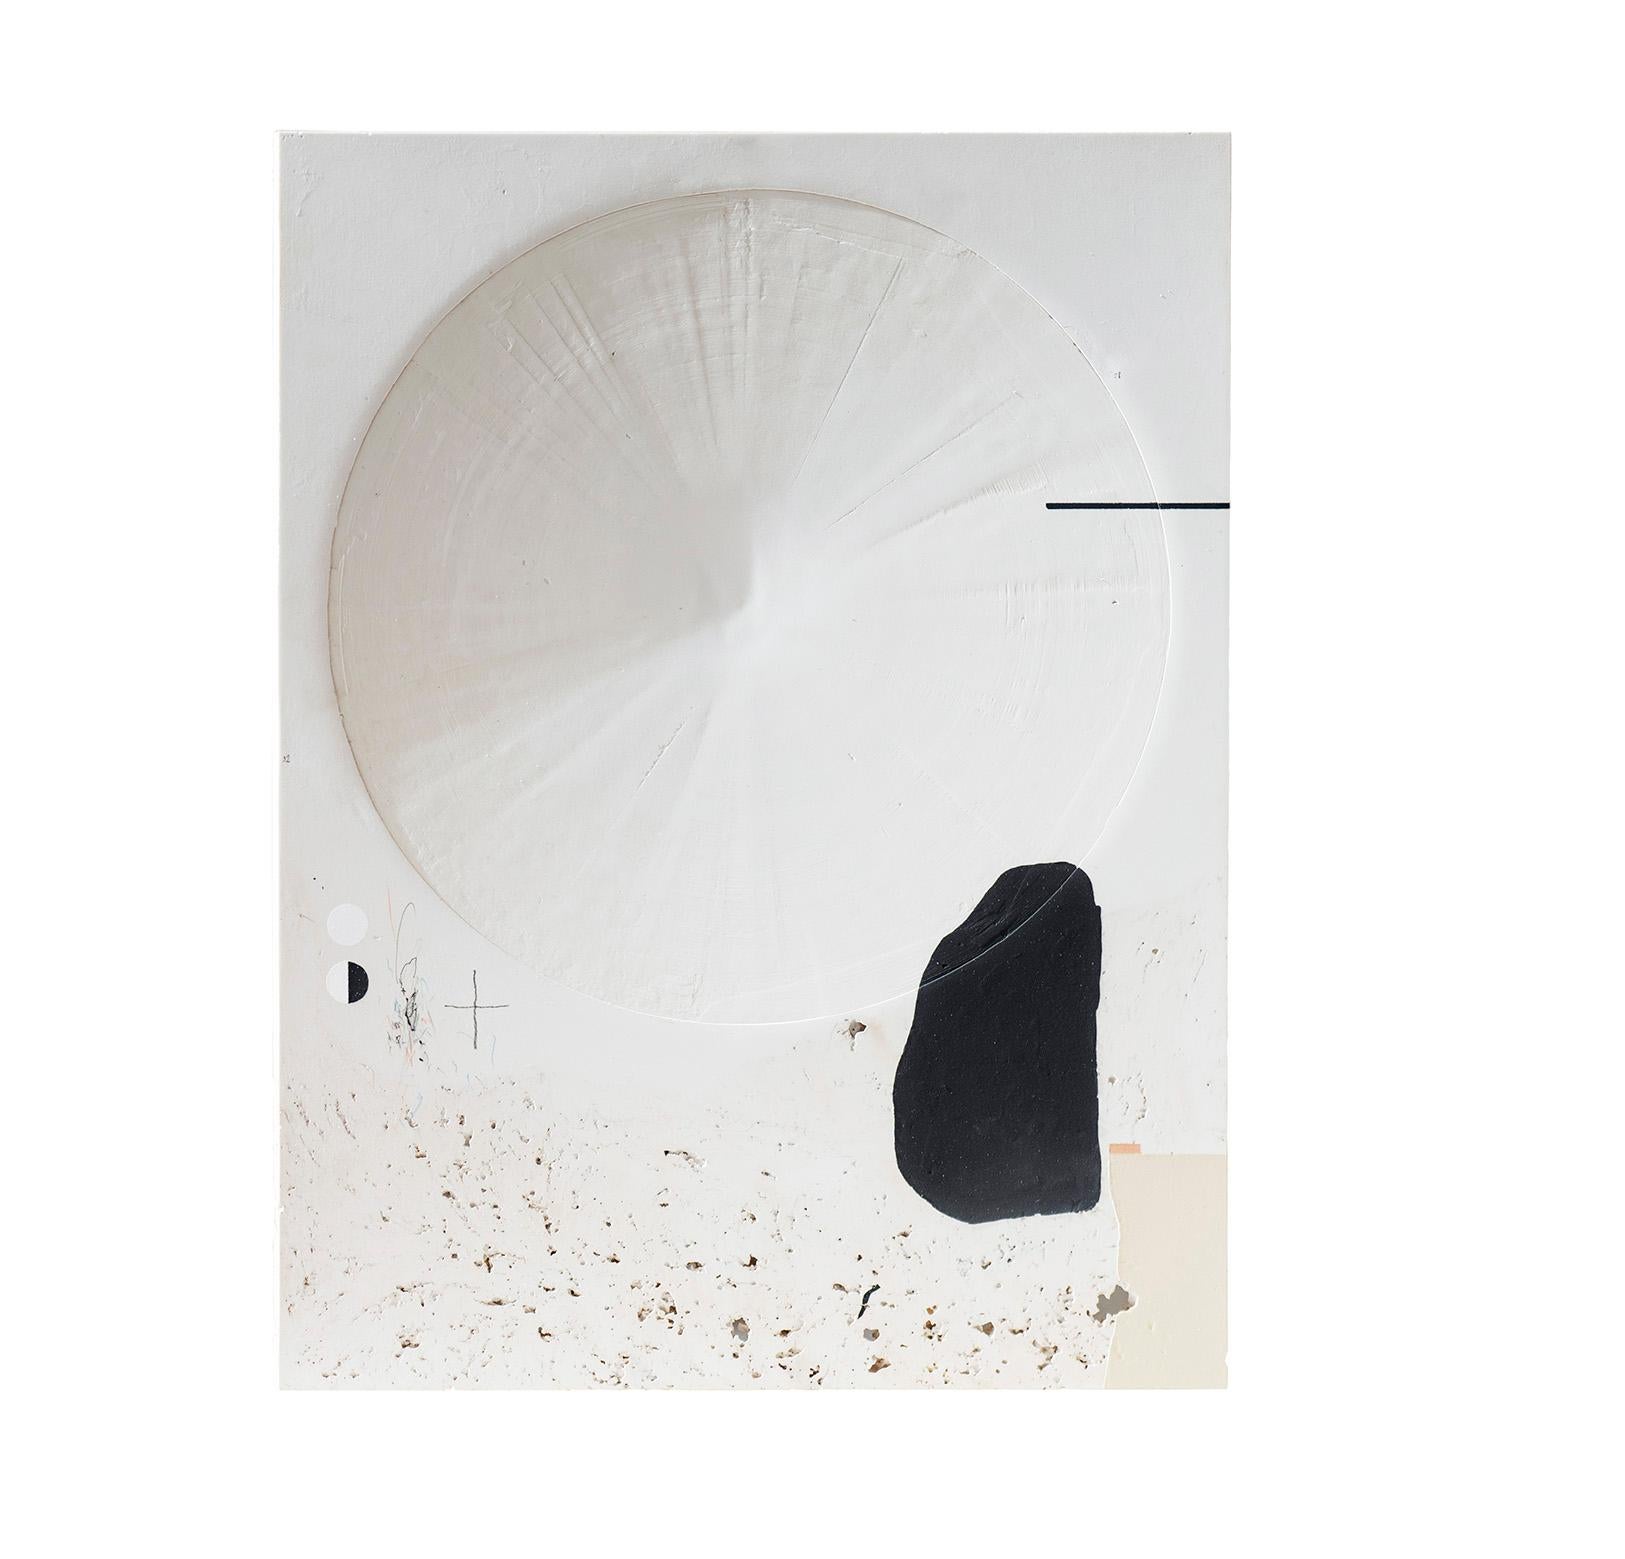 Lithic foil III object by Turbina
Dimensions: D 60 x W 80 x H 1 cm
Materials: Stone cast, mixed media

Turbina is an art and design studio located in Barcelona and focused on the creation of pieces, objects and machines that revolve around the